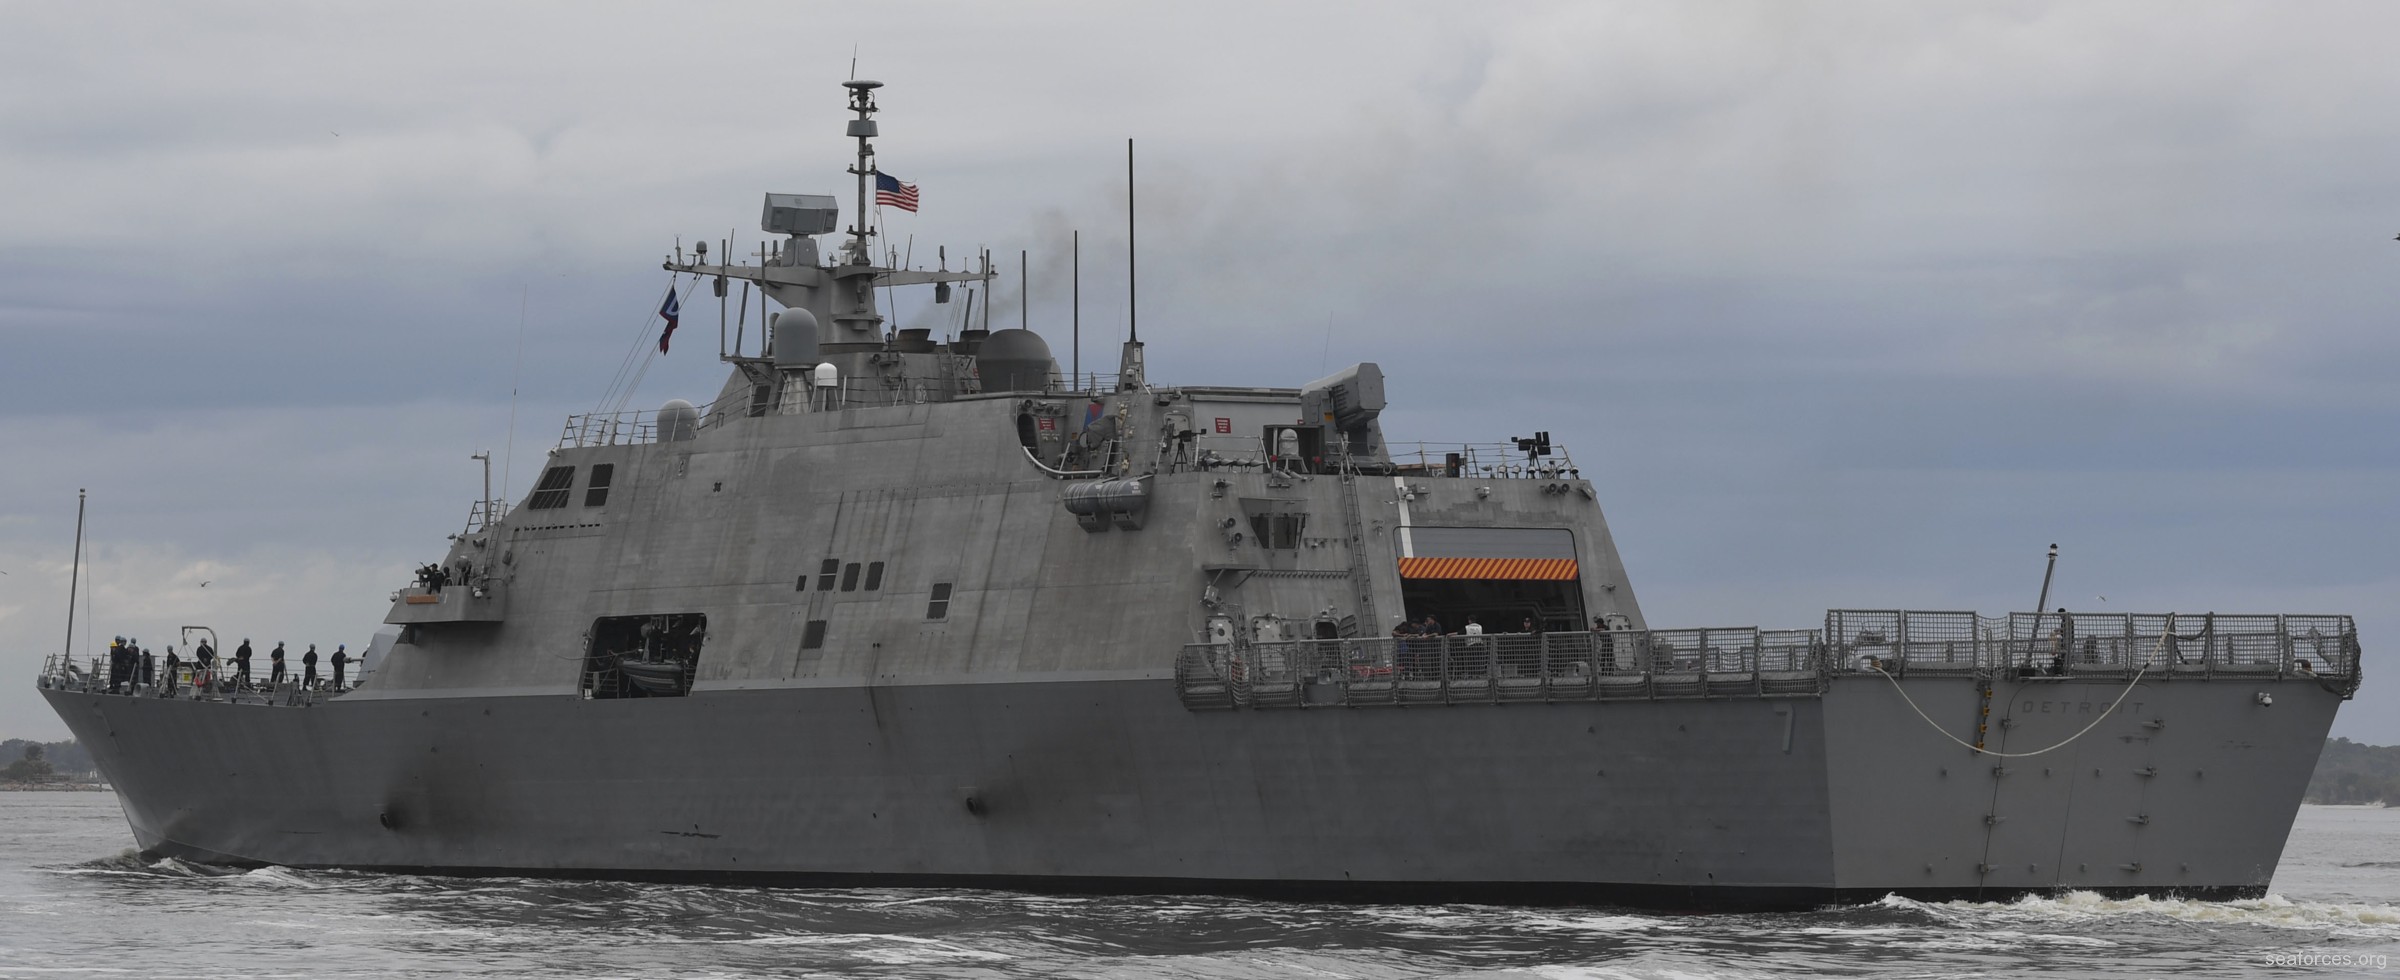 lcs-7 uss detroit littoral combat ship freedom class navy 19